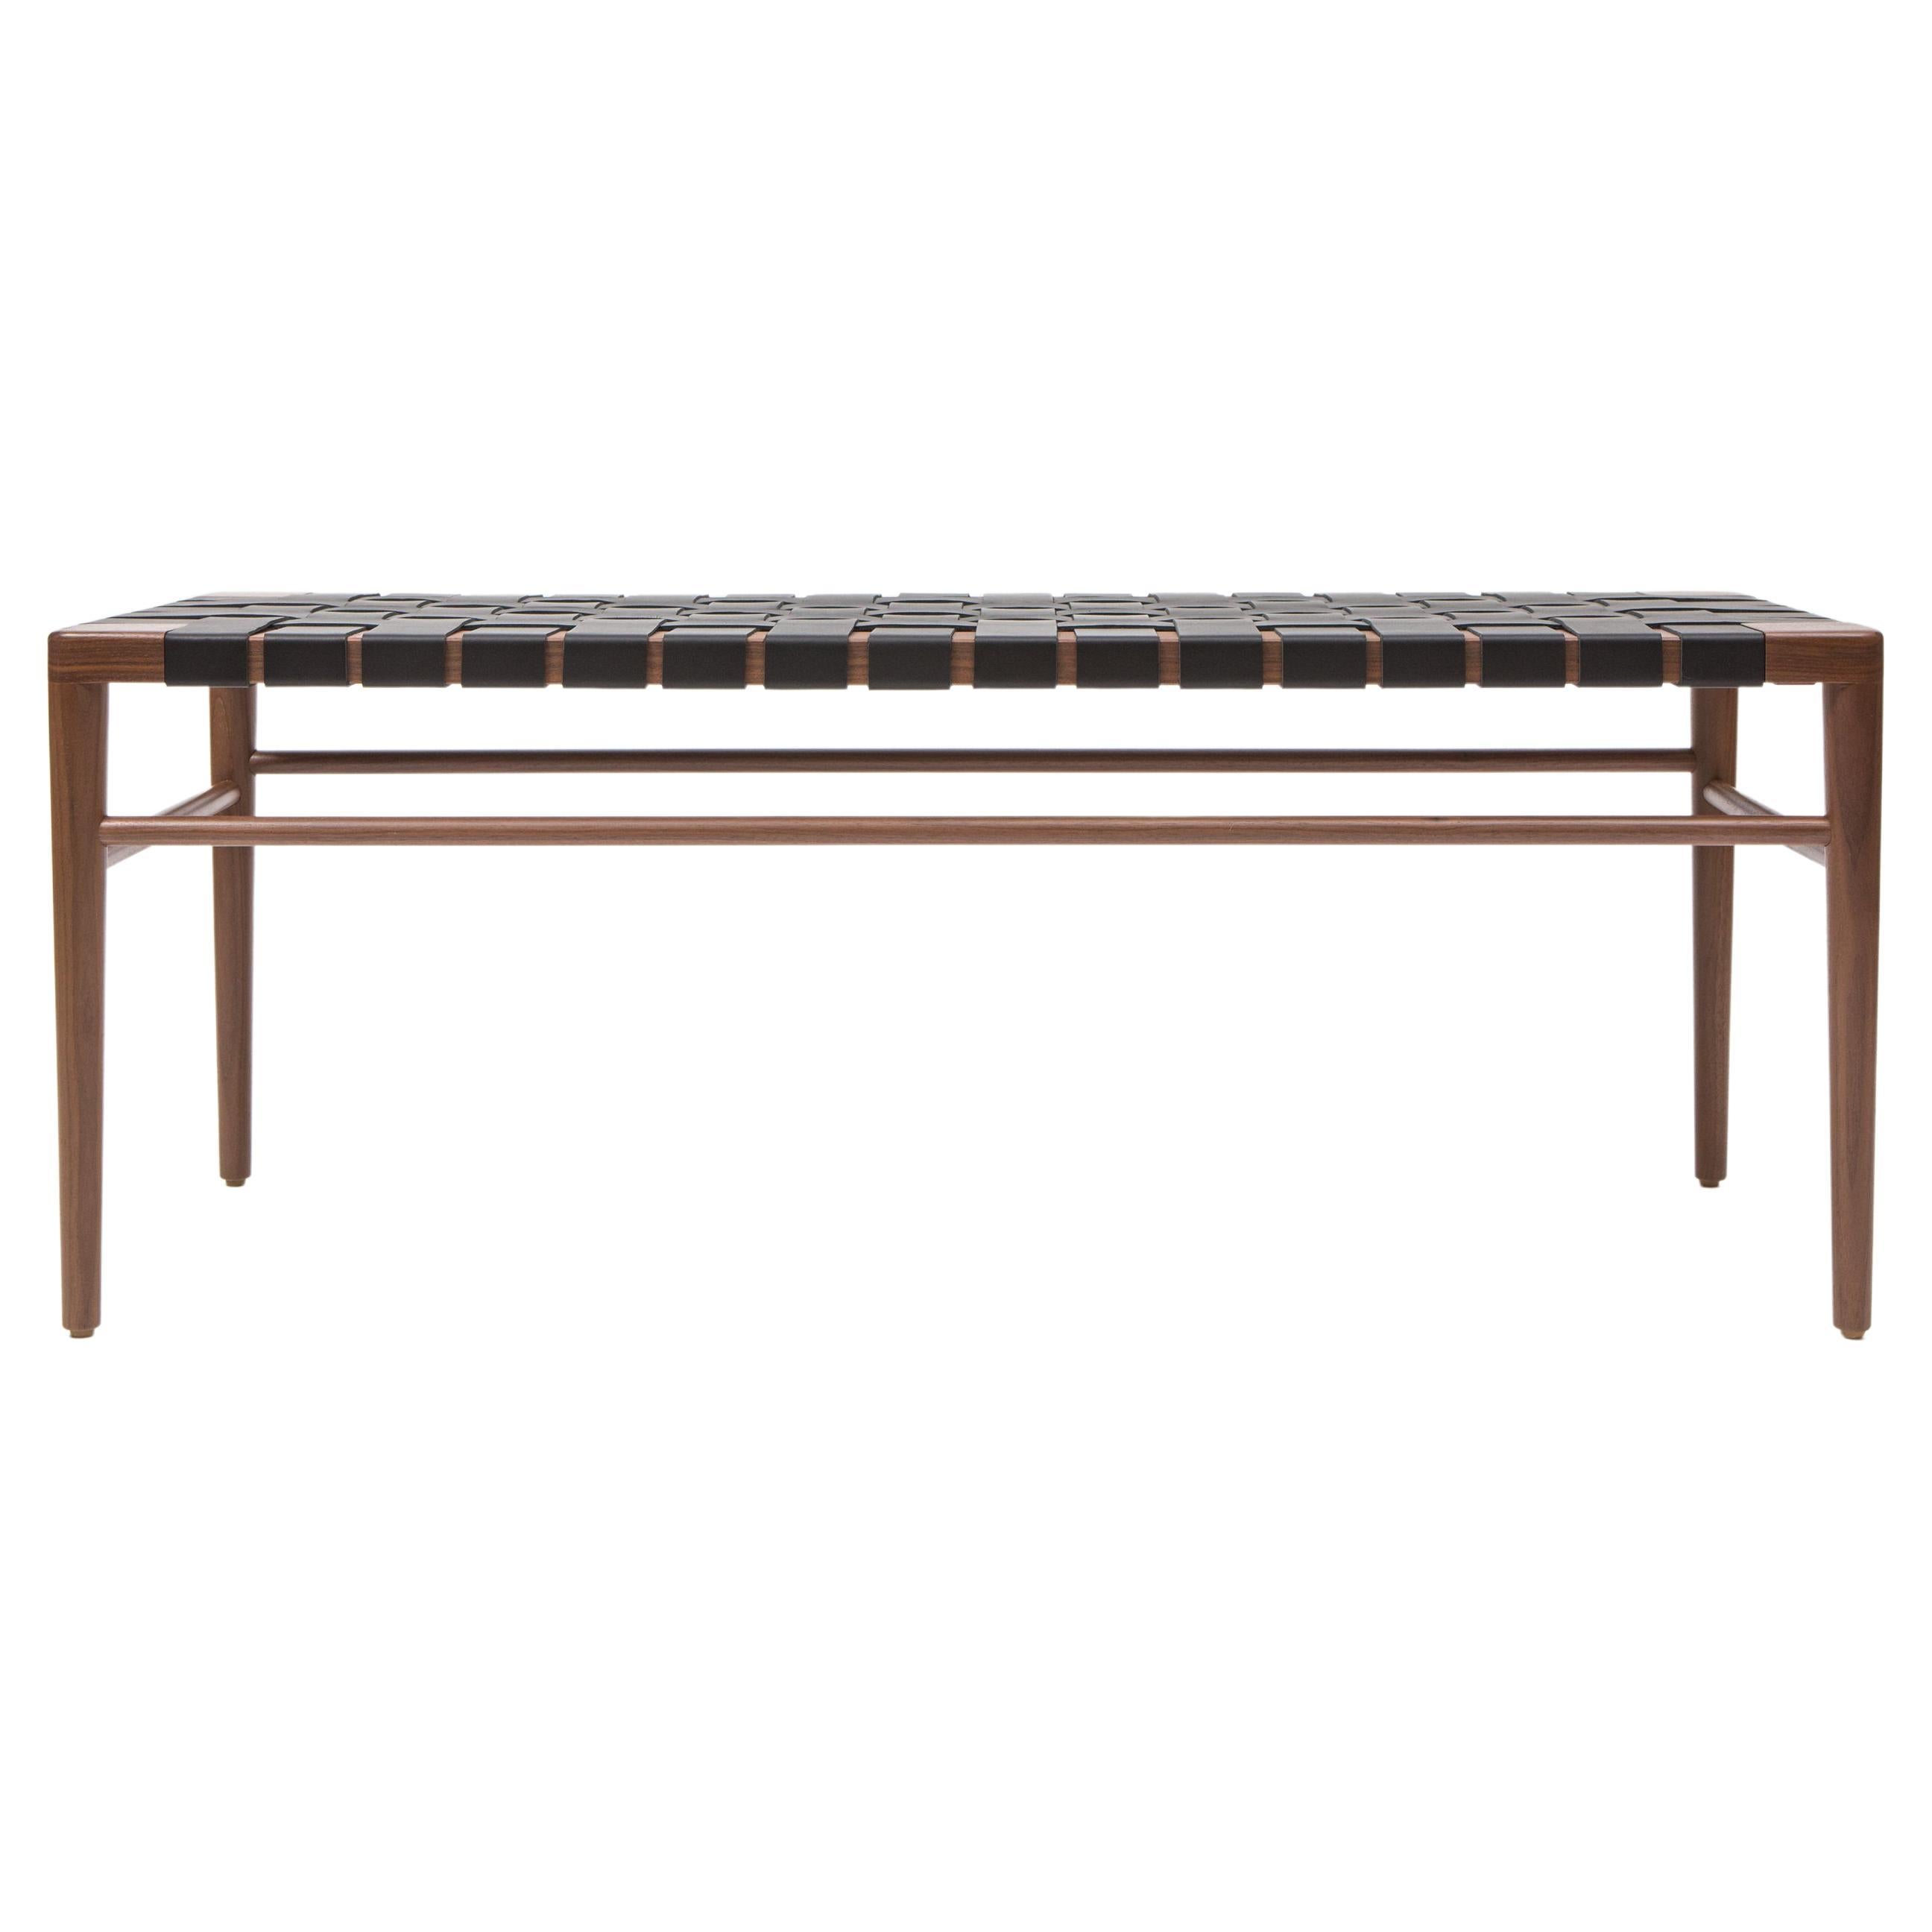 44" Woven Leather Bench in Walnut and Black Leather by Mel Smilow For Sale